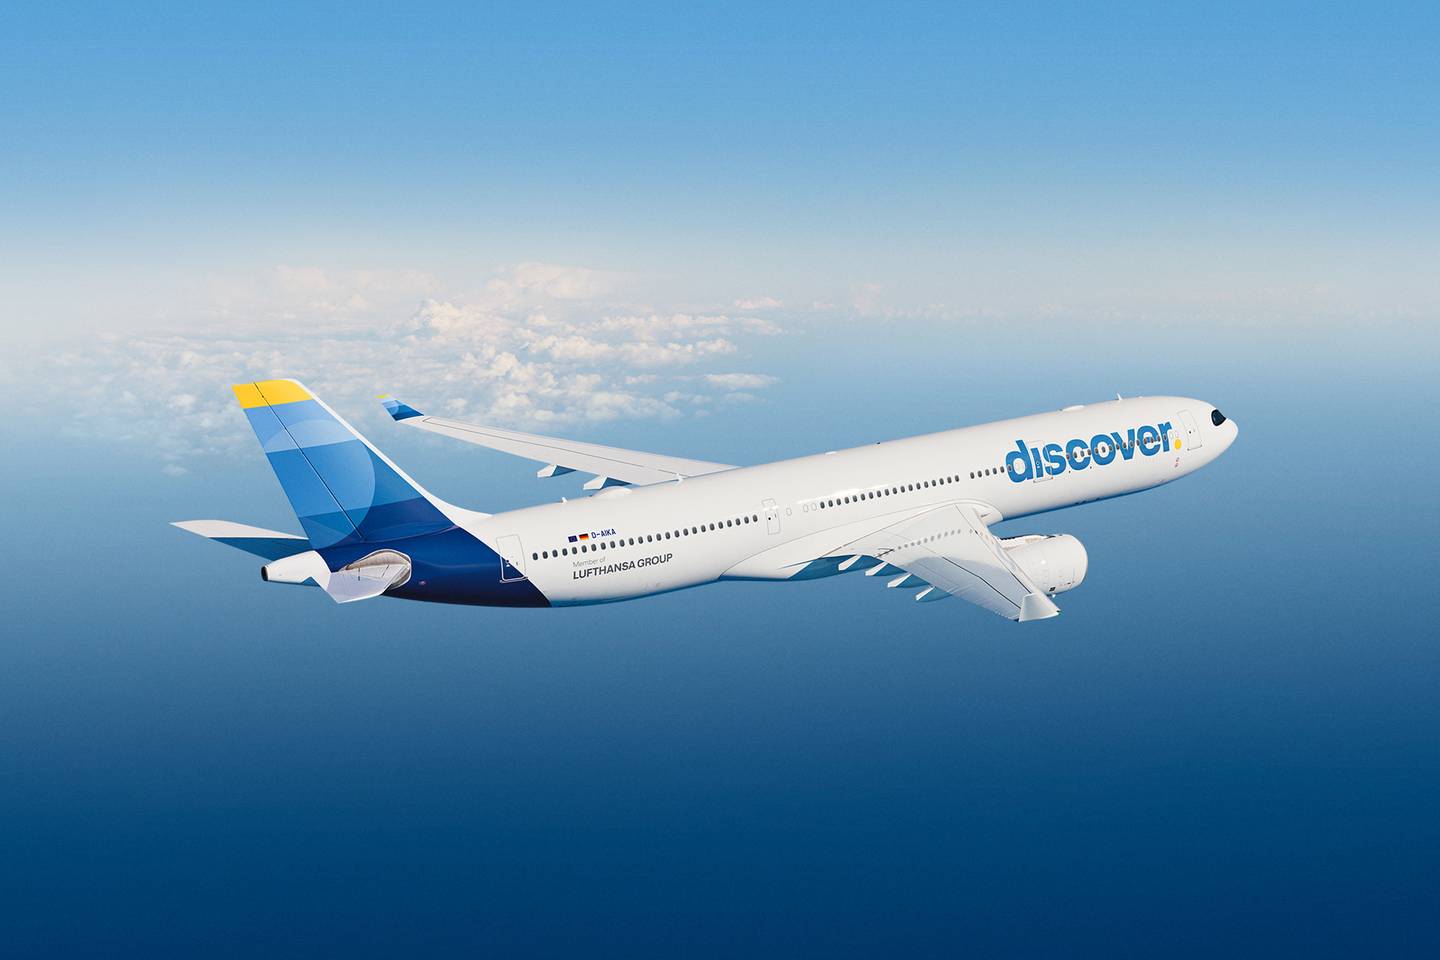 Discover Airlines aircraft in the sky.